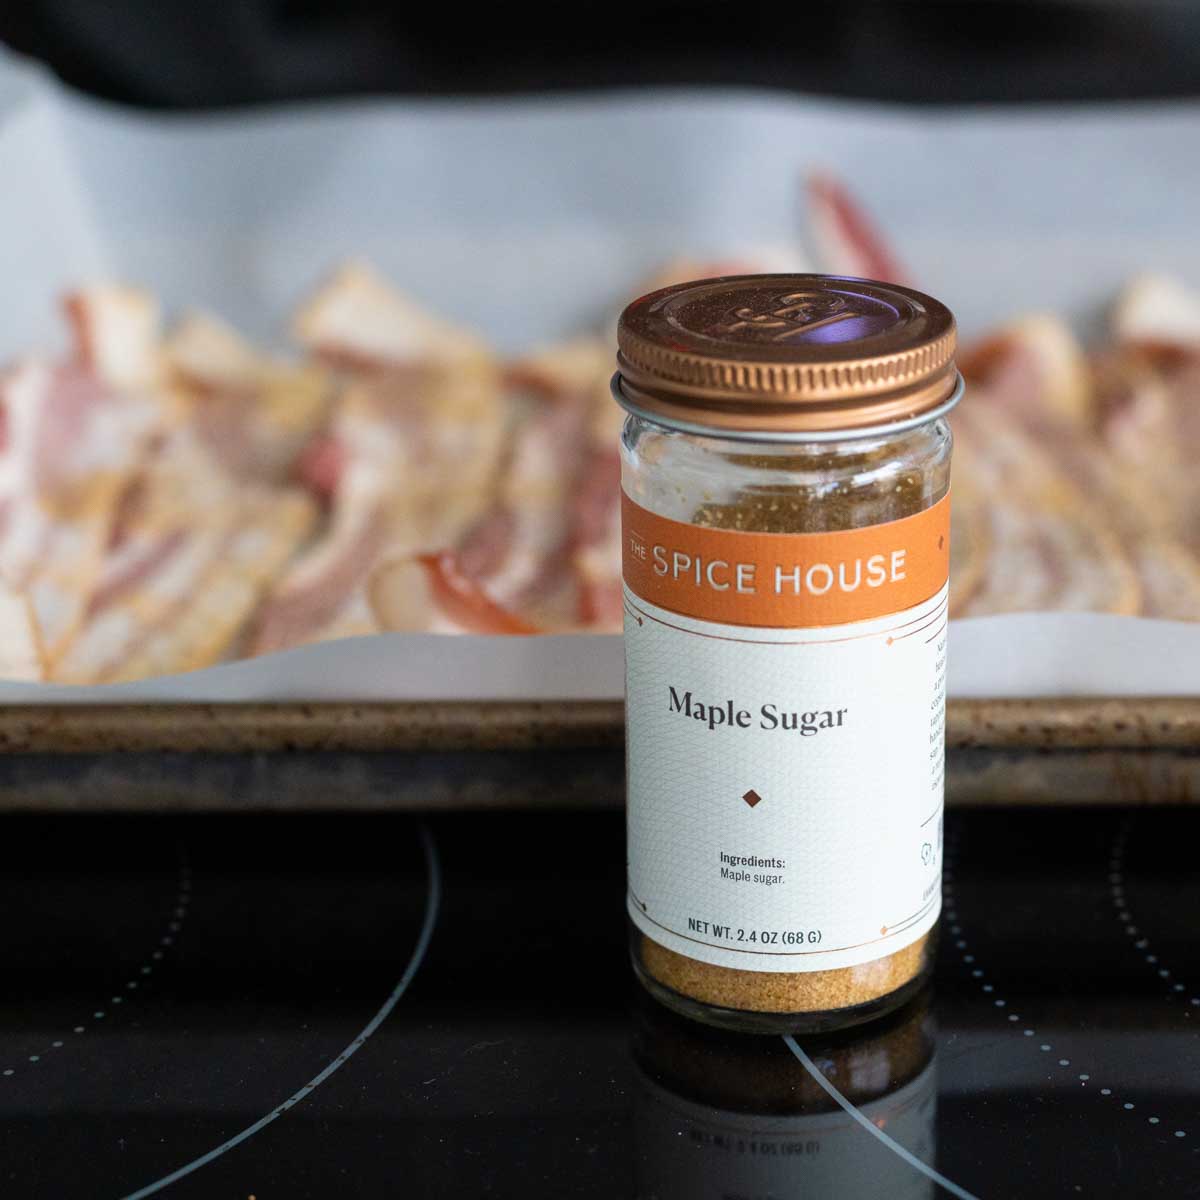 A jar of maple sugar sits in front of a pan of bacon.